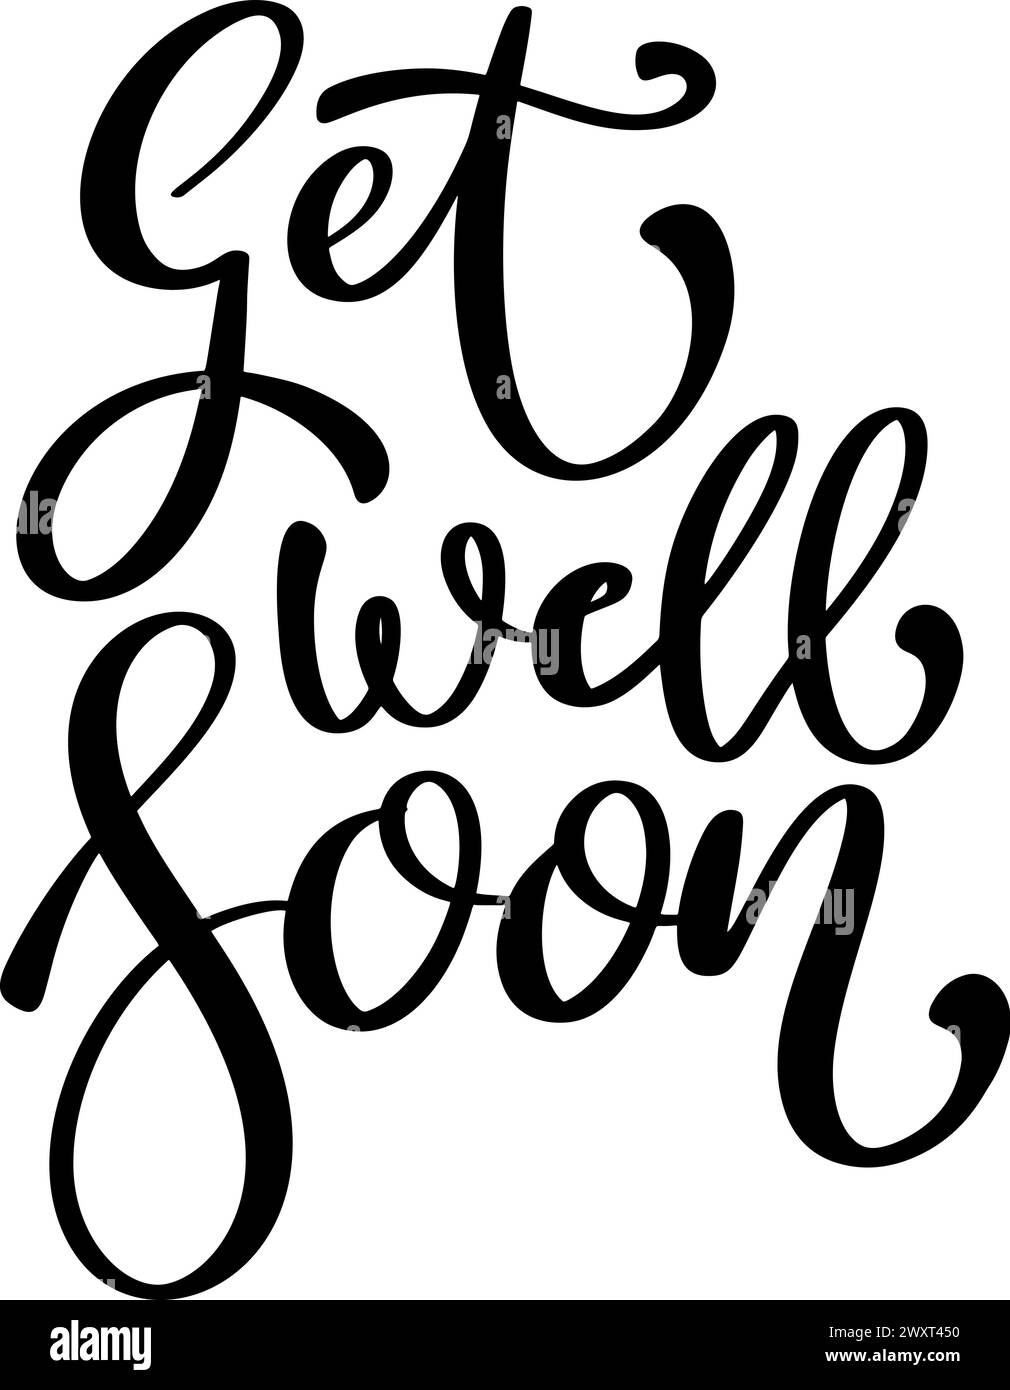 Get well soon. Lettering phrase isolated on white background. Design element Stock Vector